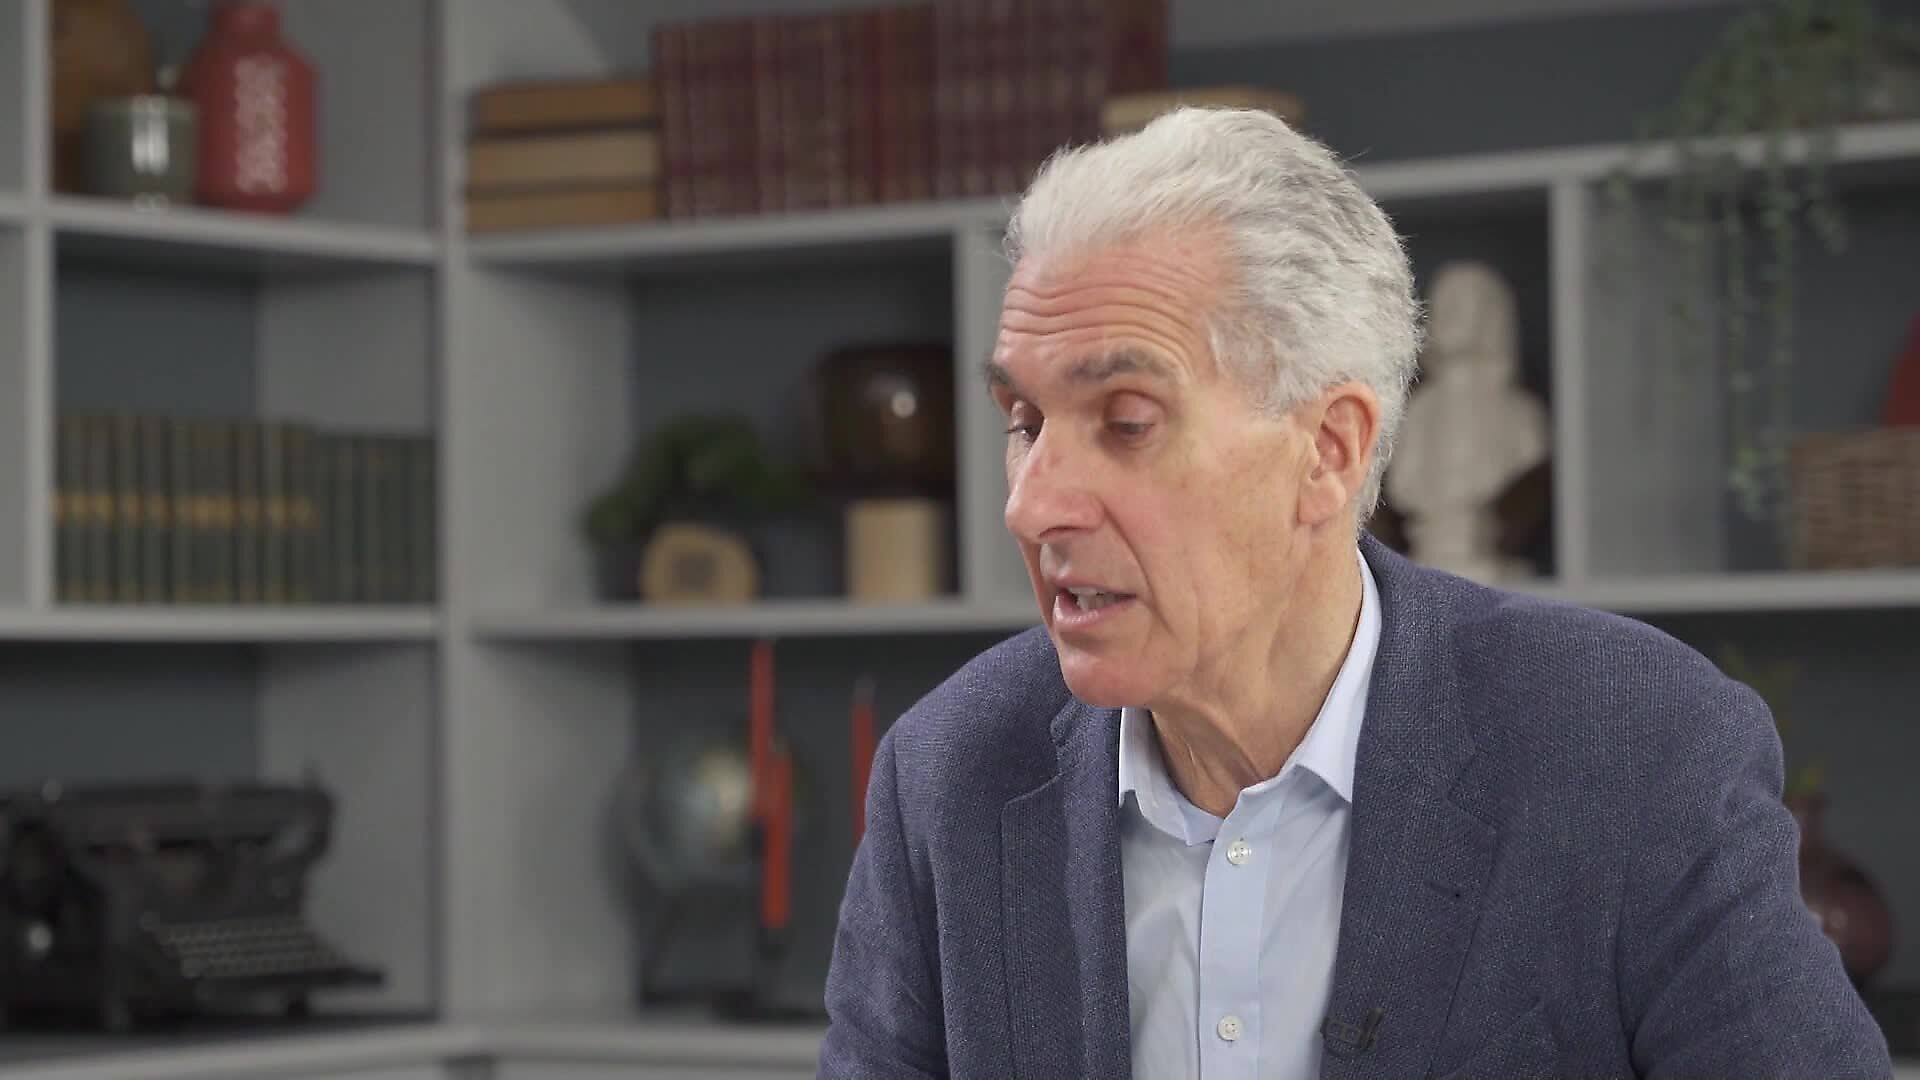 Facing the Canon: Nicky Gumbel